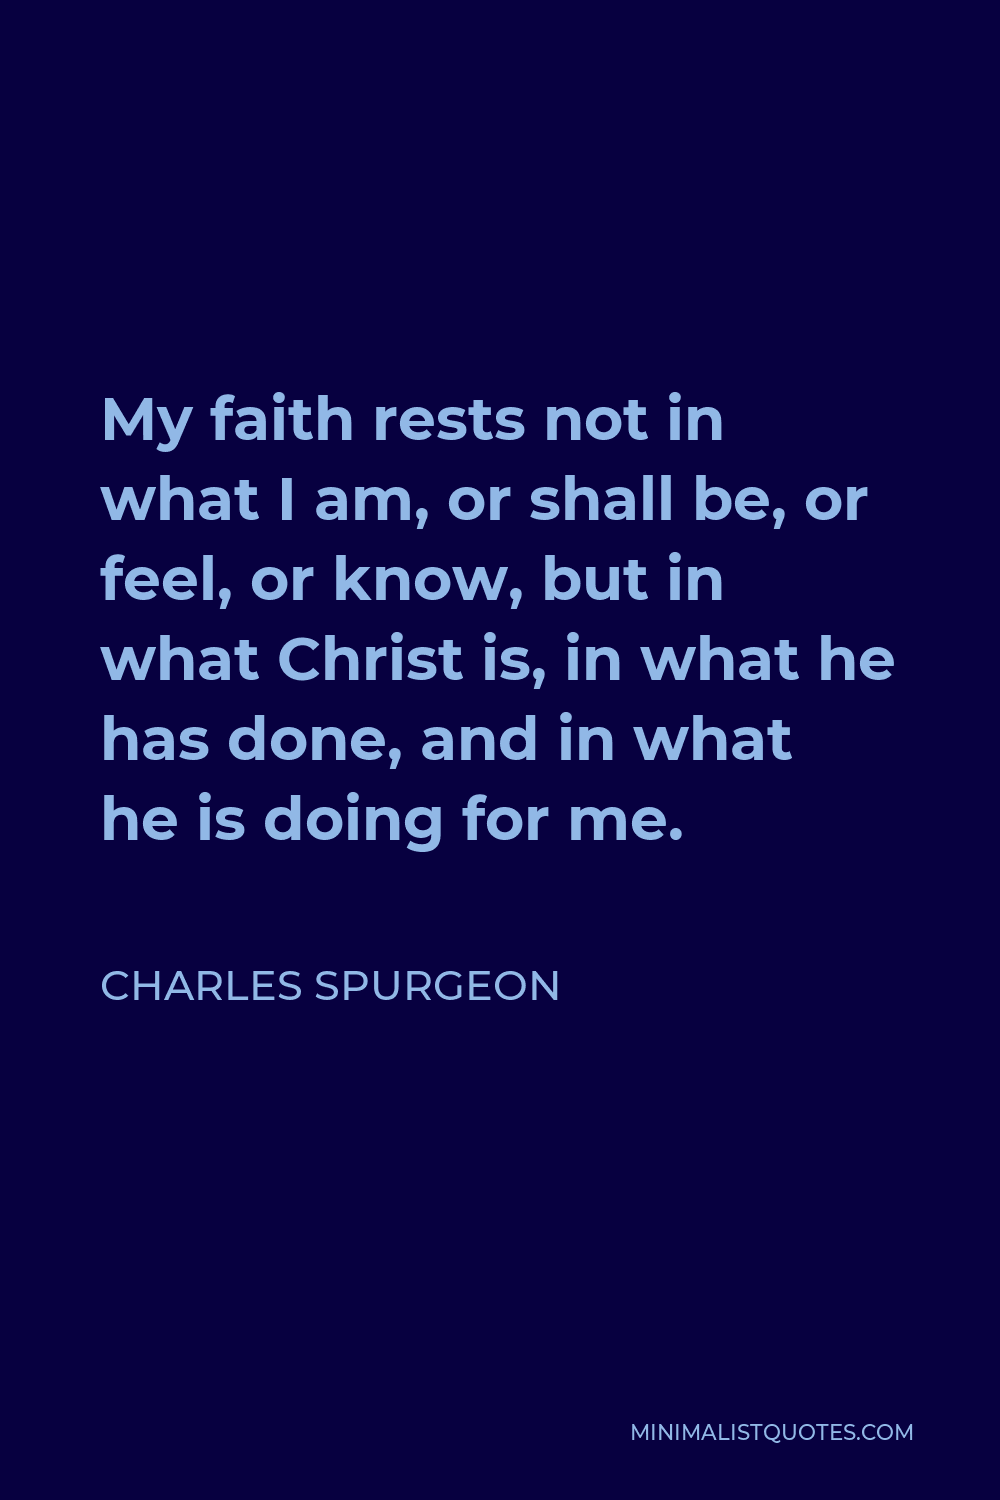 Charles Spurgeon Quote - My faith rests not in what I am, or shall be, or feel, or know, but in what Christ is, in what he has done, and in what he is doing for me.